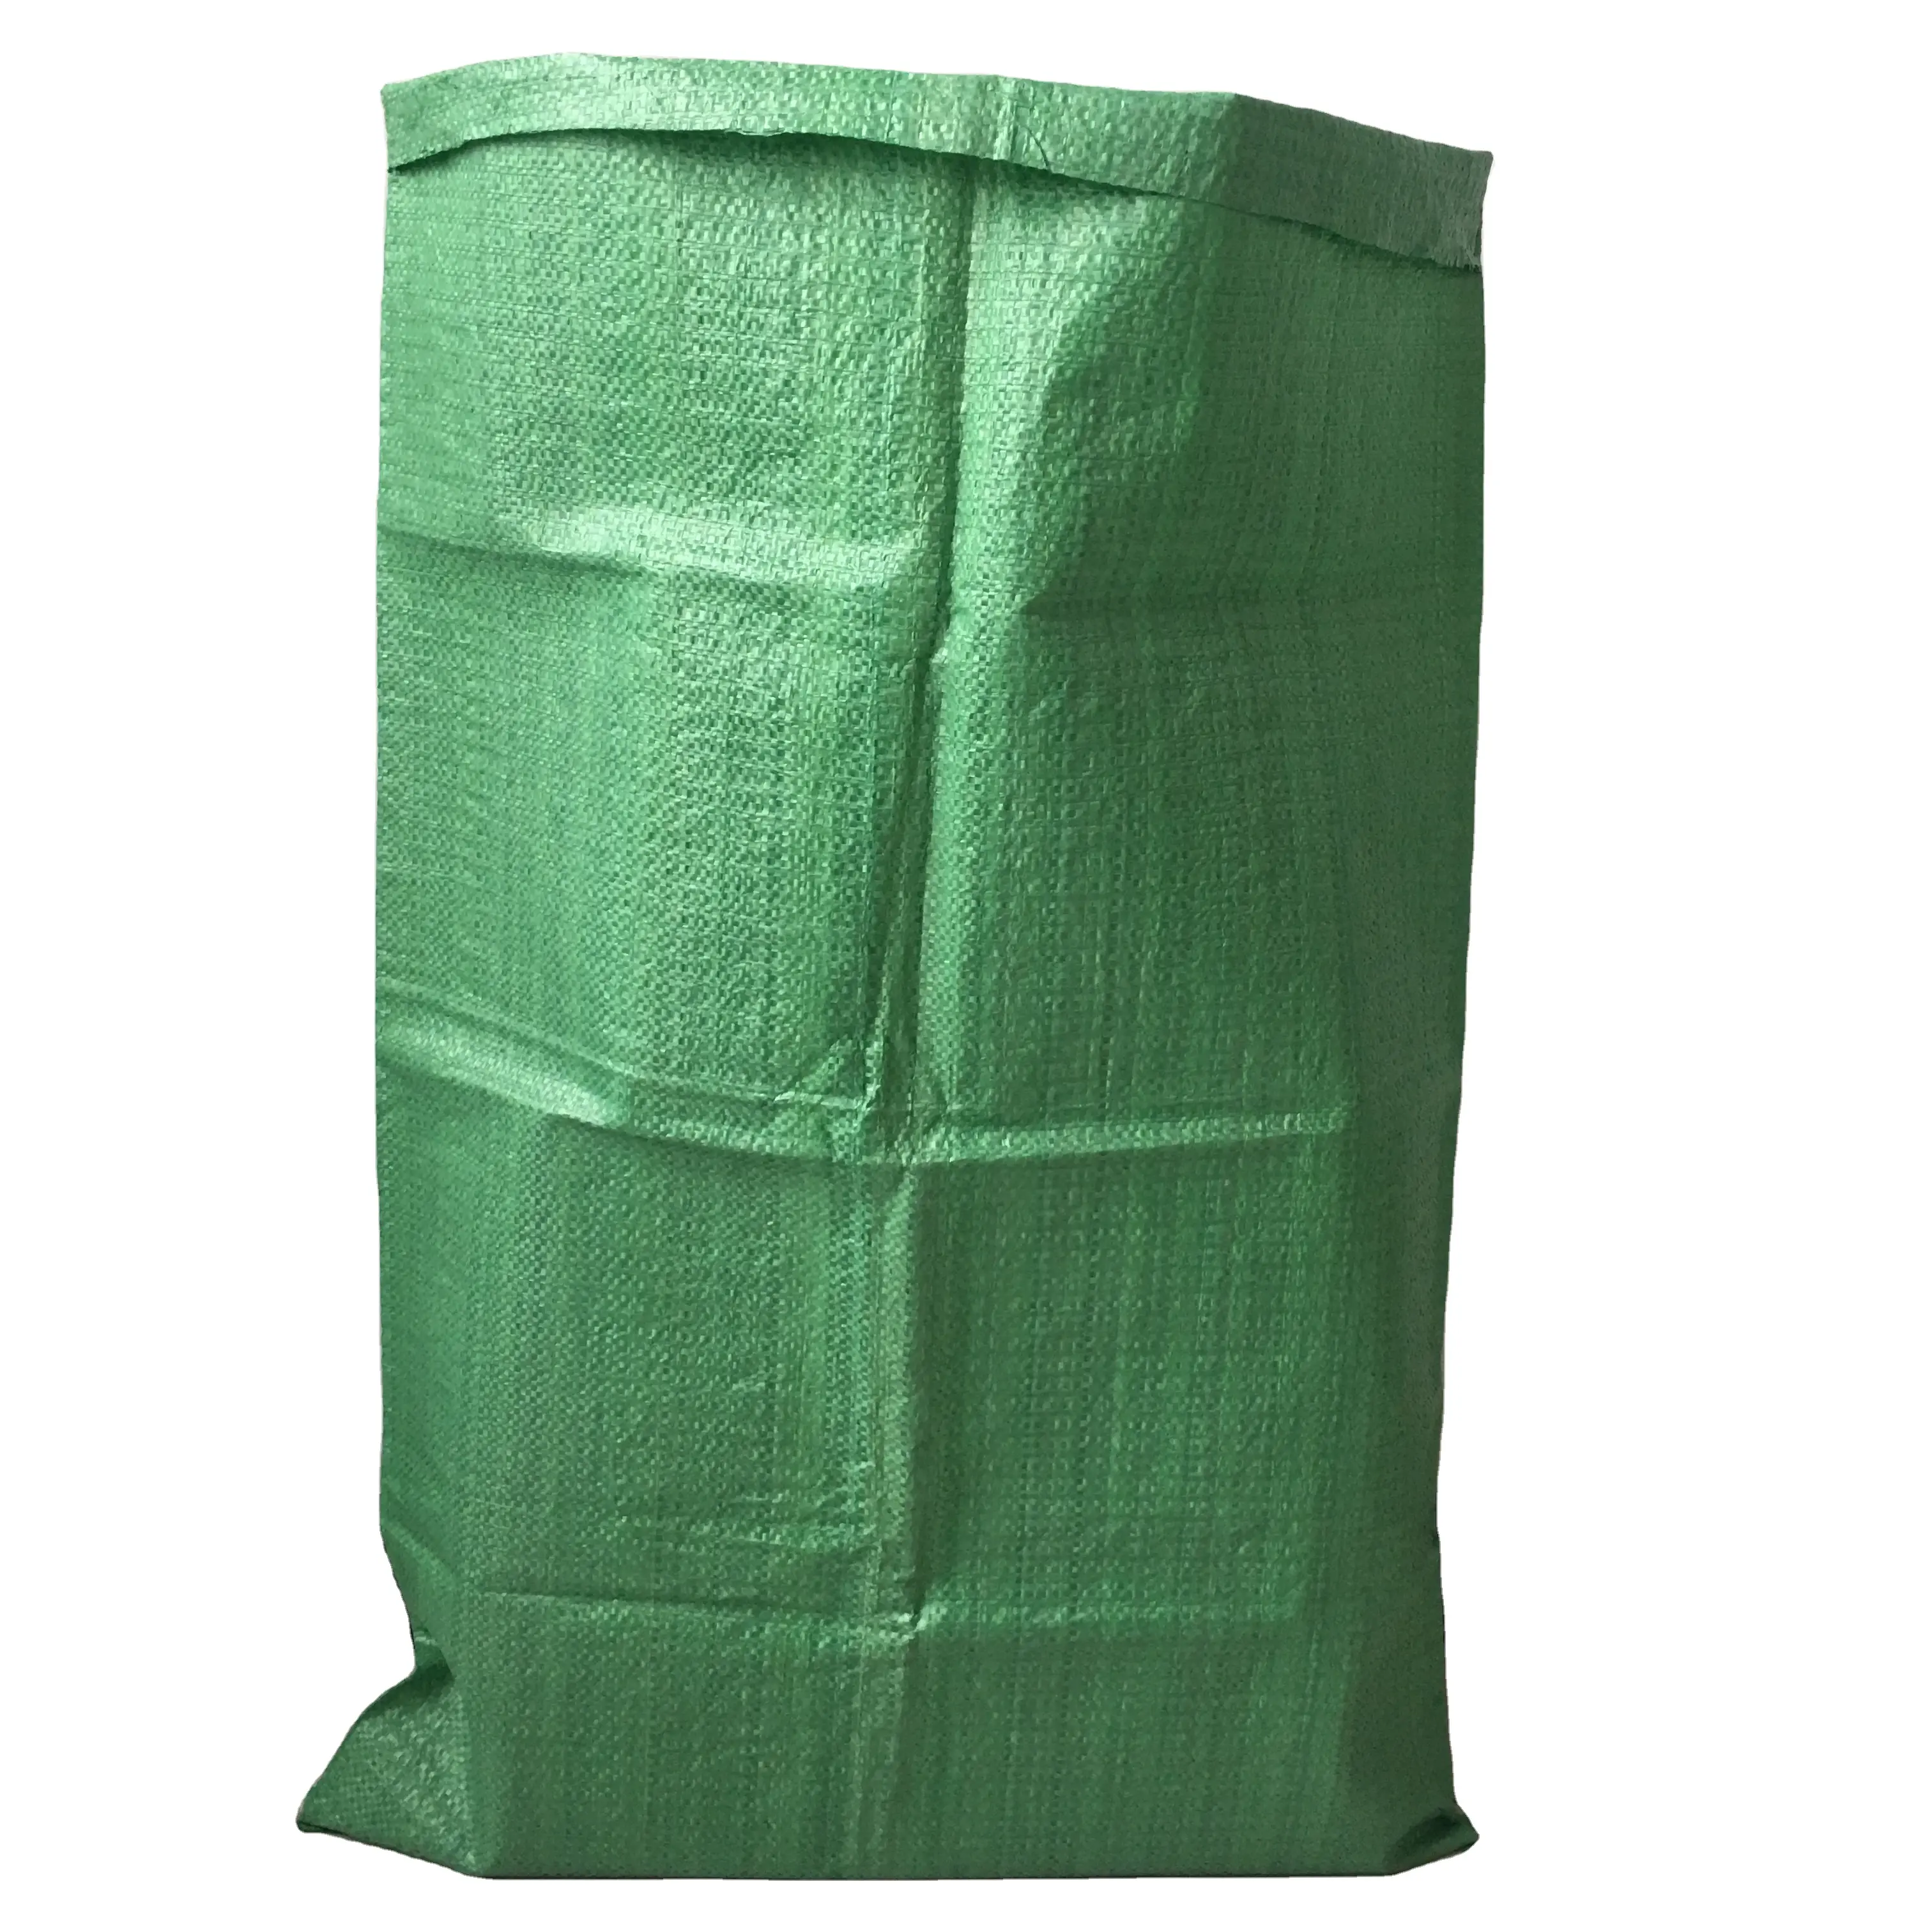 RUBBLE BAGS,24 HOUR DELIVERY! RUBBLE SACKS 100 LARGE EXTRA STRONG HEAVY DUTY! 